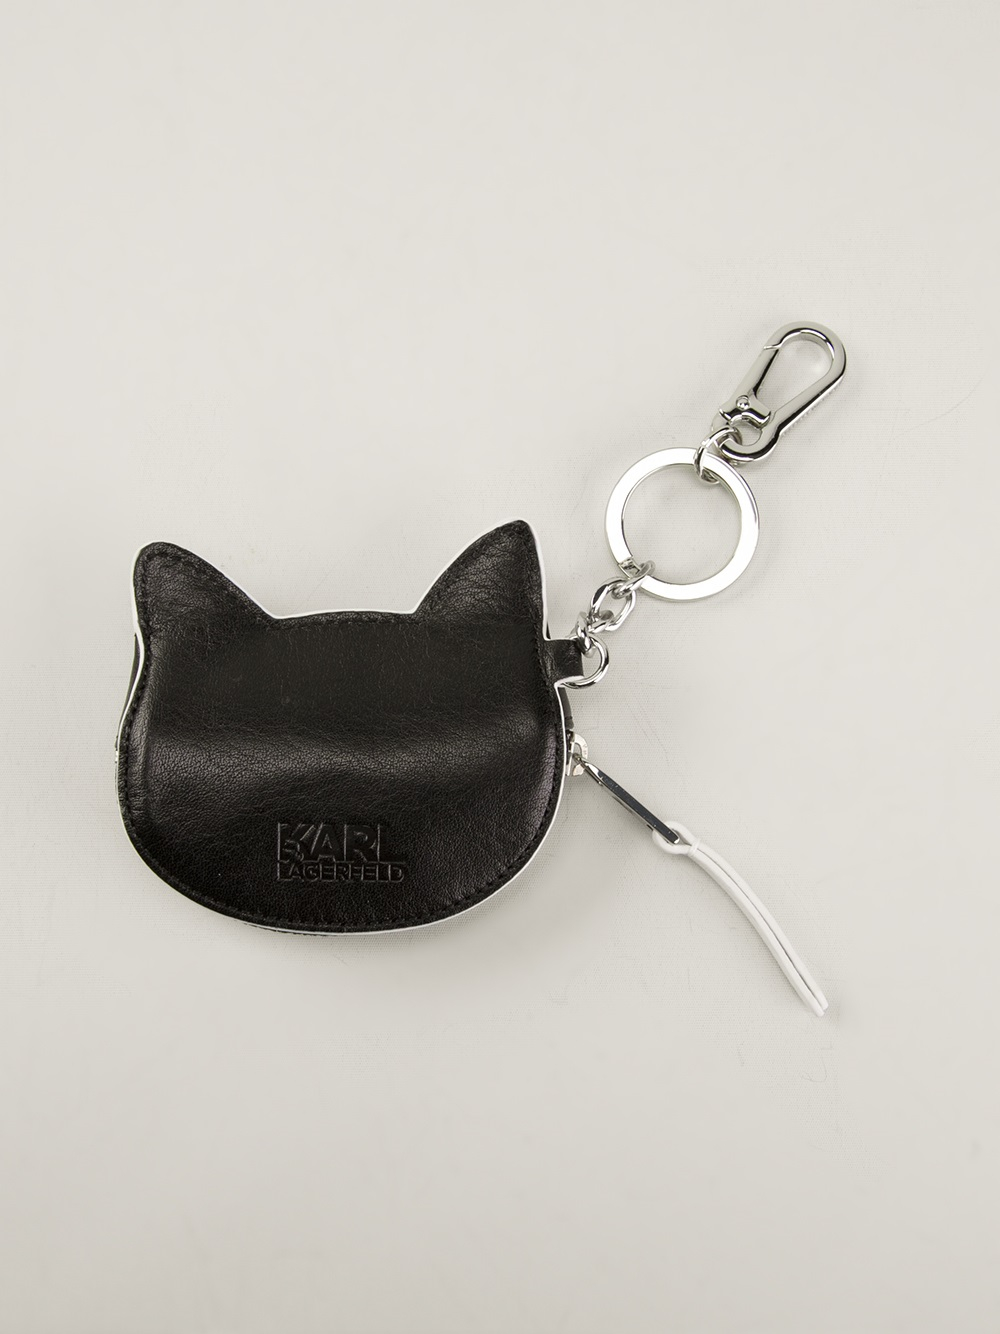 Karl Lagerfeld Cat Shaped Coin Purse in Black - Lyst